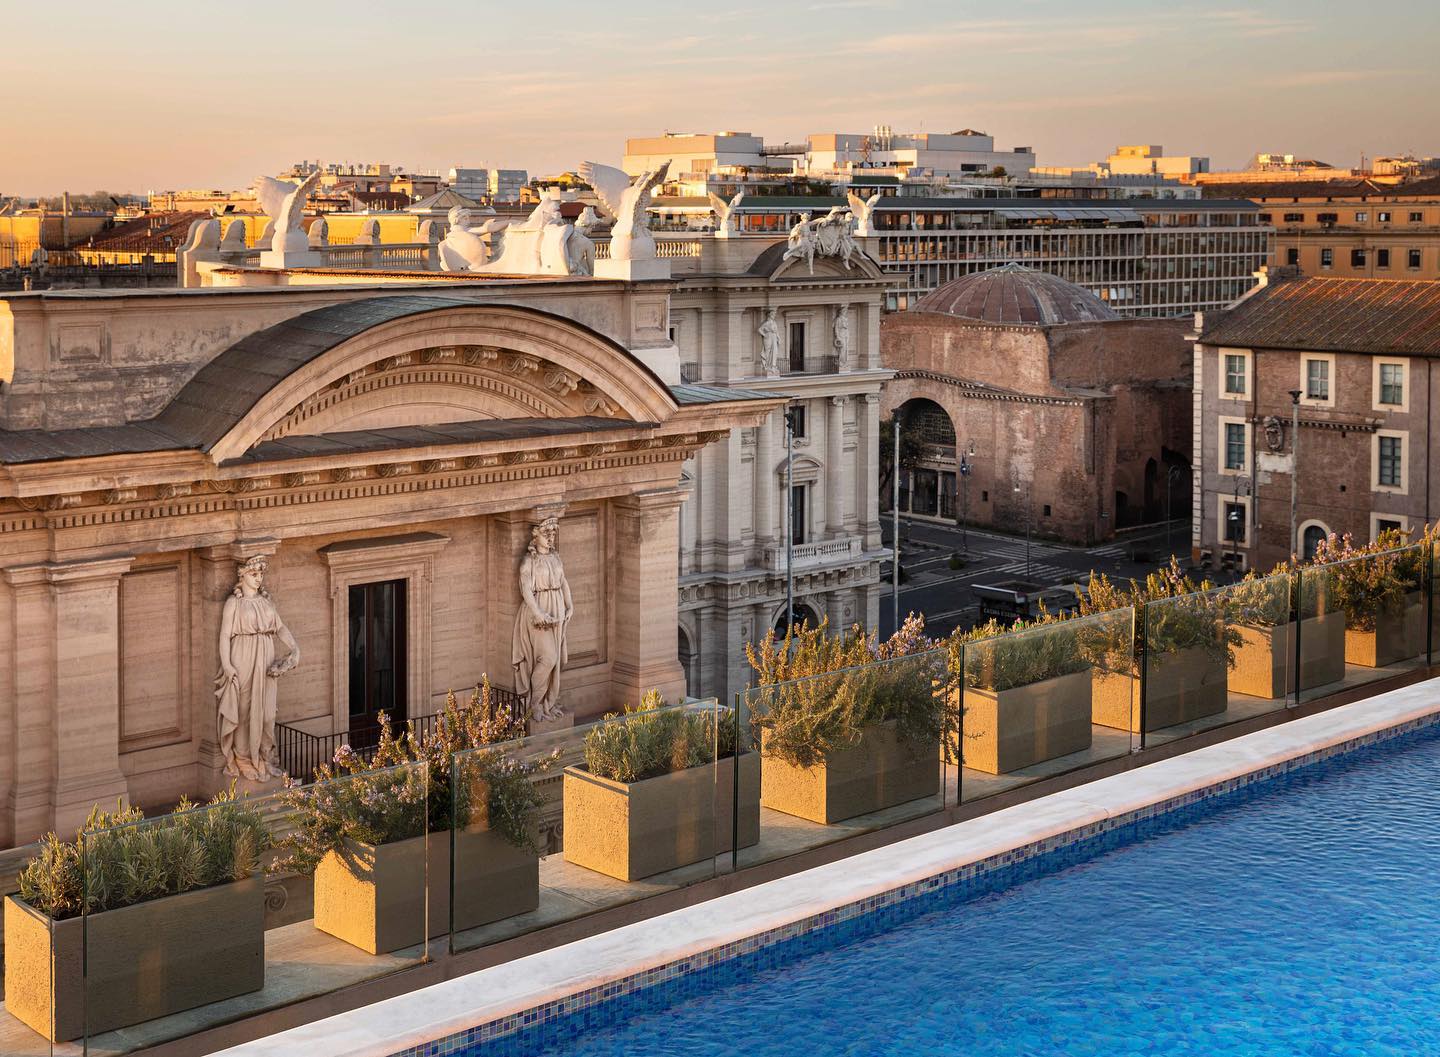 20 Best Hotels in Rome with Rooftop Pools